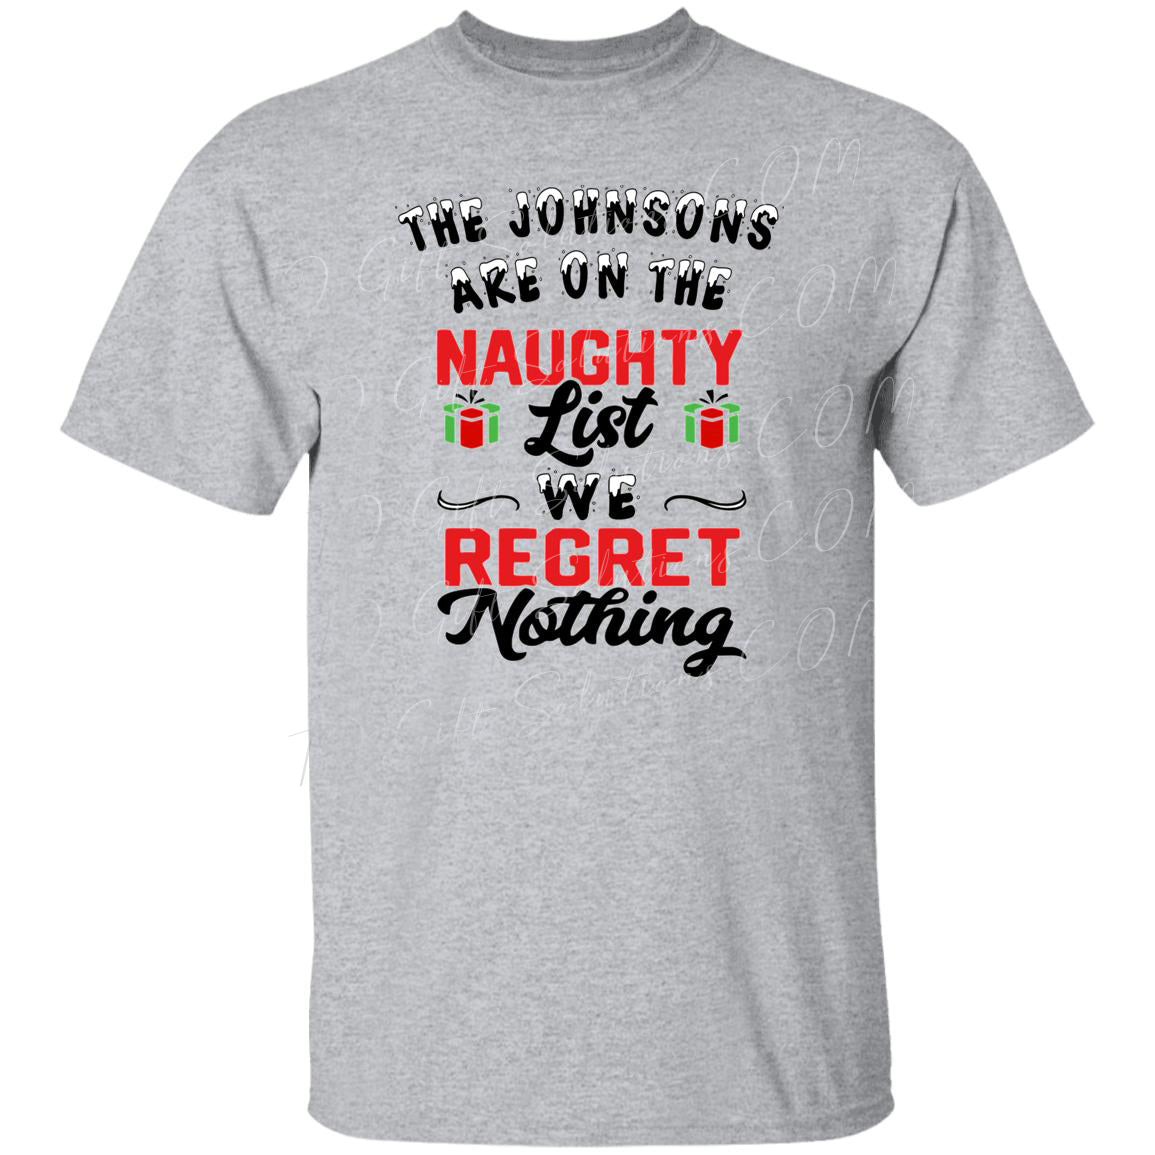 Personalized Family Matching Christmas Shirts - We Regret Nothing Family T-shirt-TD Gift Solutions.com